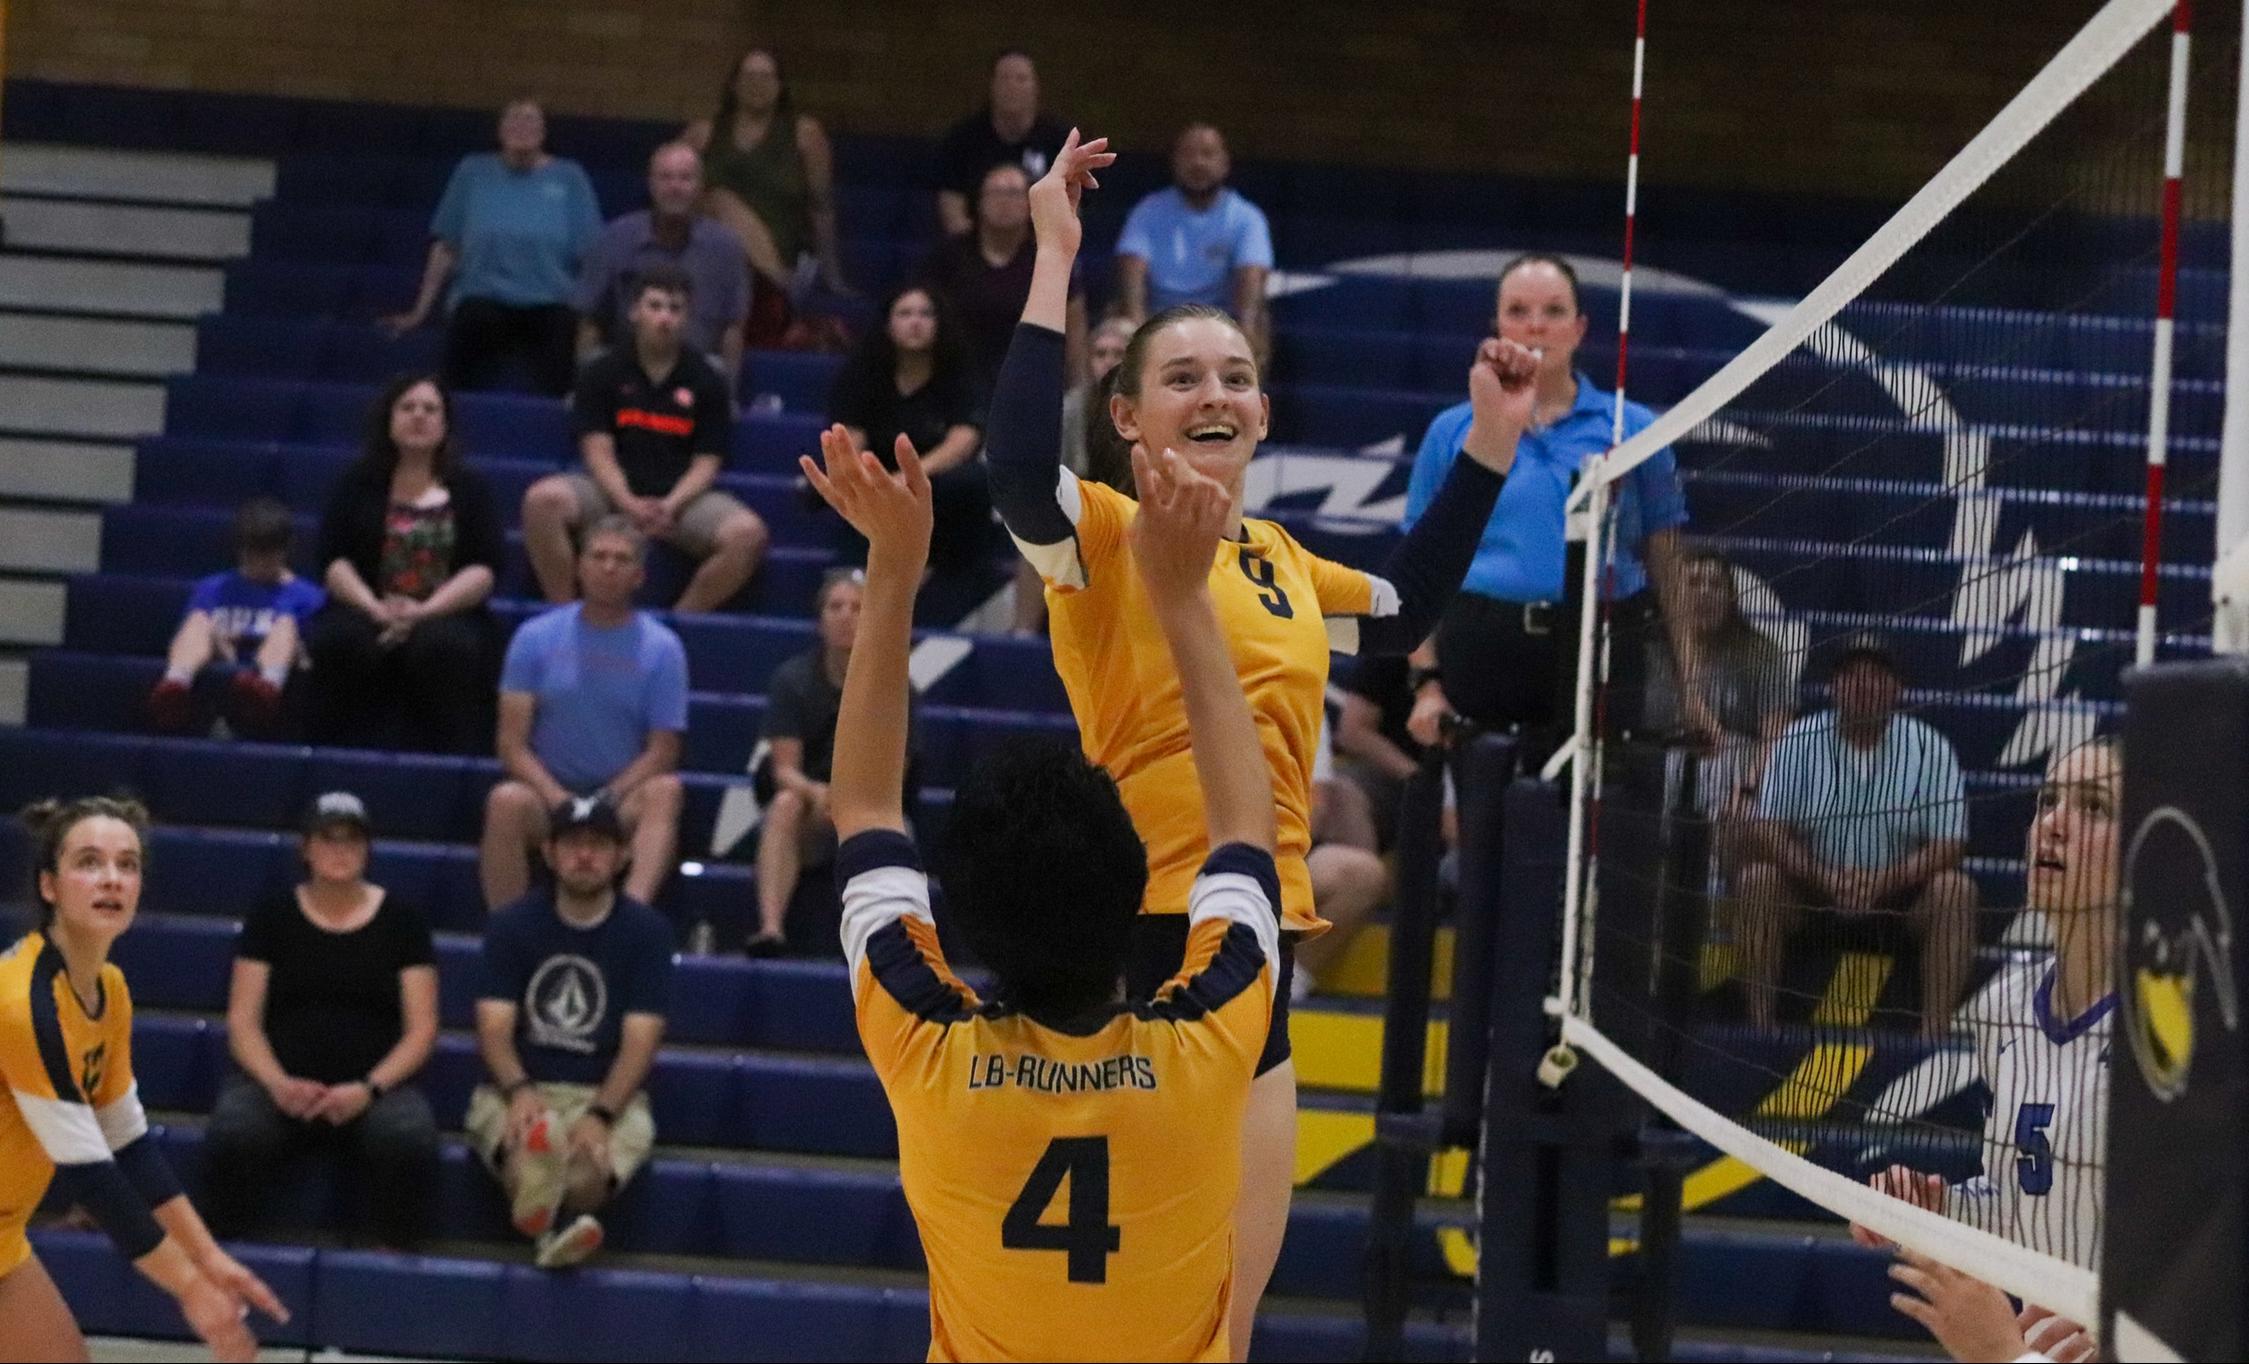 Roadrunners Shelbey Nichol receives a pass from teammate Zaley Bennett in a match against Edmonds Community College on Wednesday, August 31.